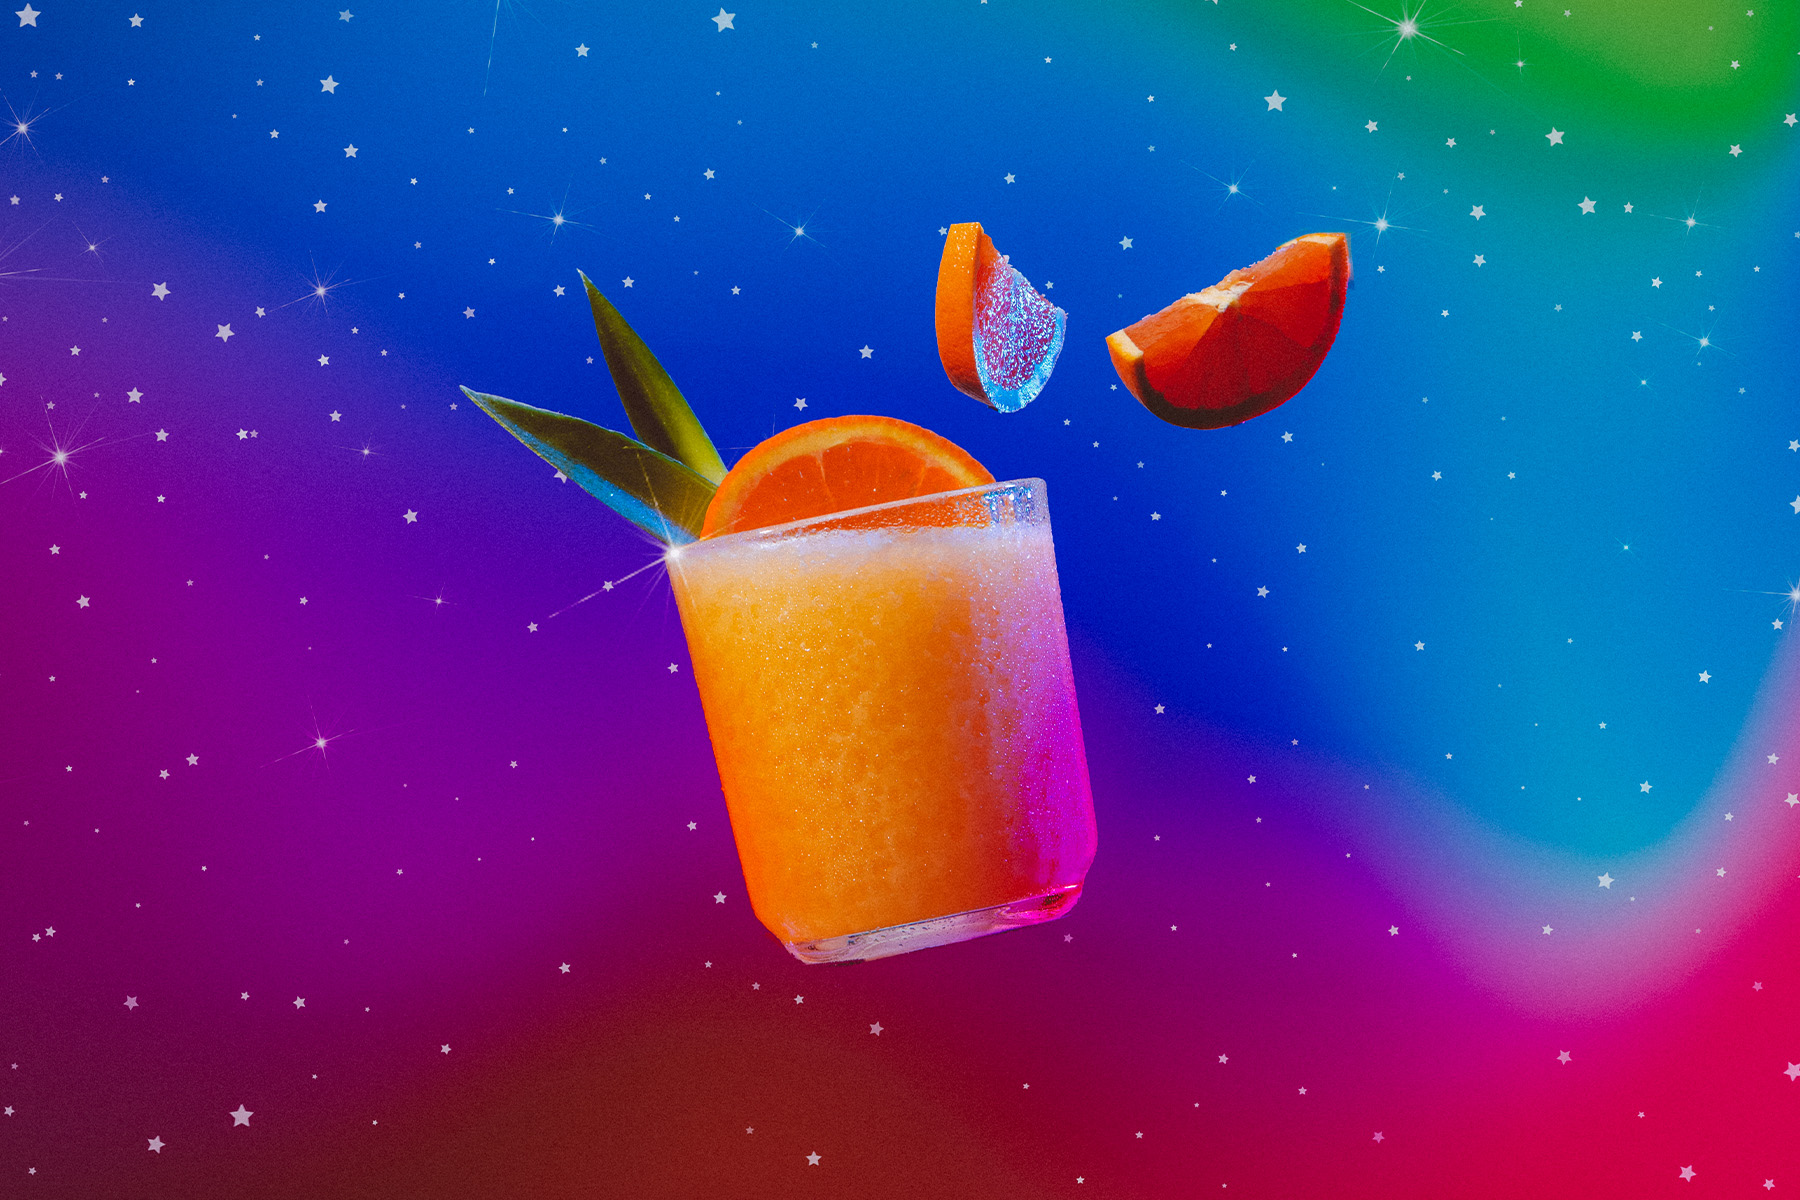 gemini zodiac inspired rum, pineapple, orange, and coconut cream cocktail surrounded by orange slices and mint leaves in cosmic surroundings